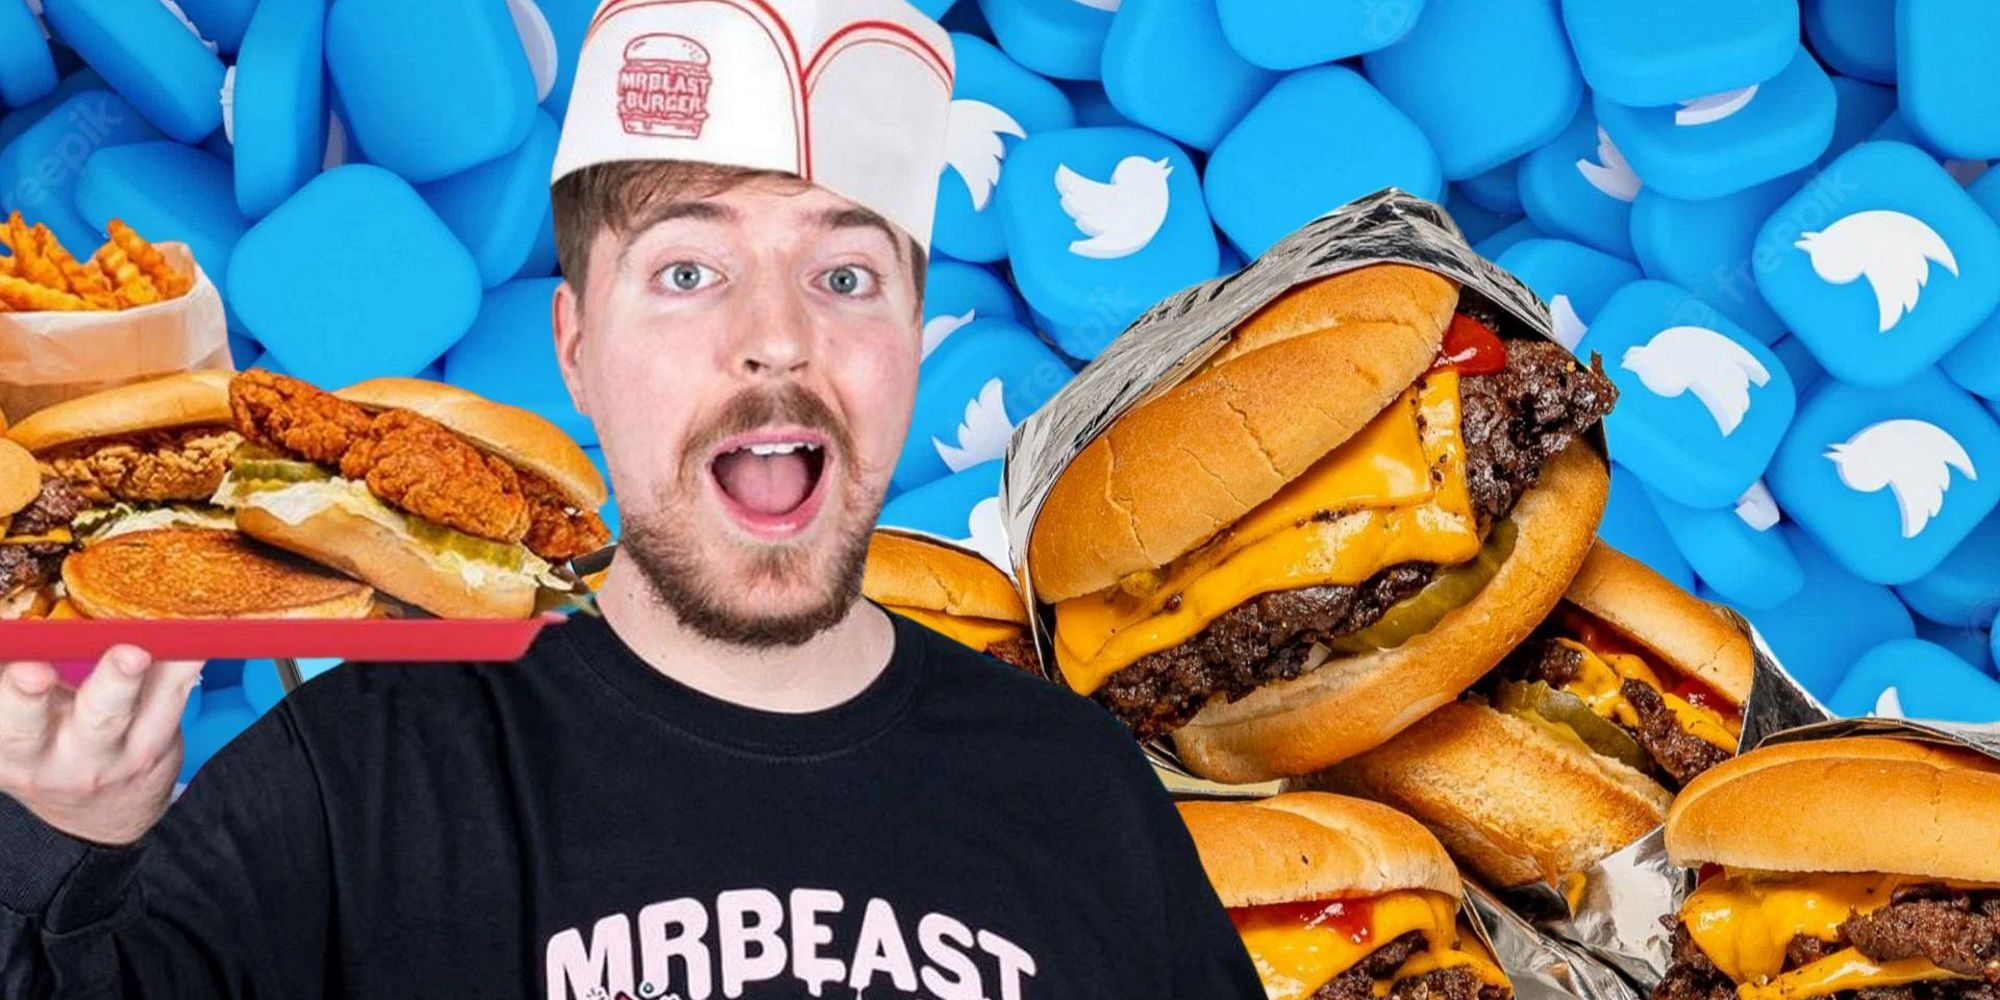 I Tried MrBeast's Burger in Orlando and What Happened Next SHOCKED Me!  #MrBeastBurger 